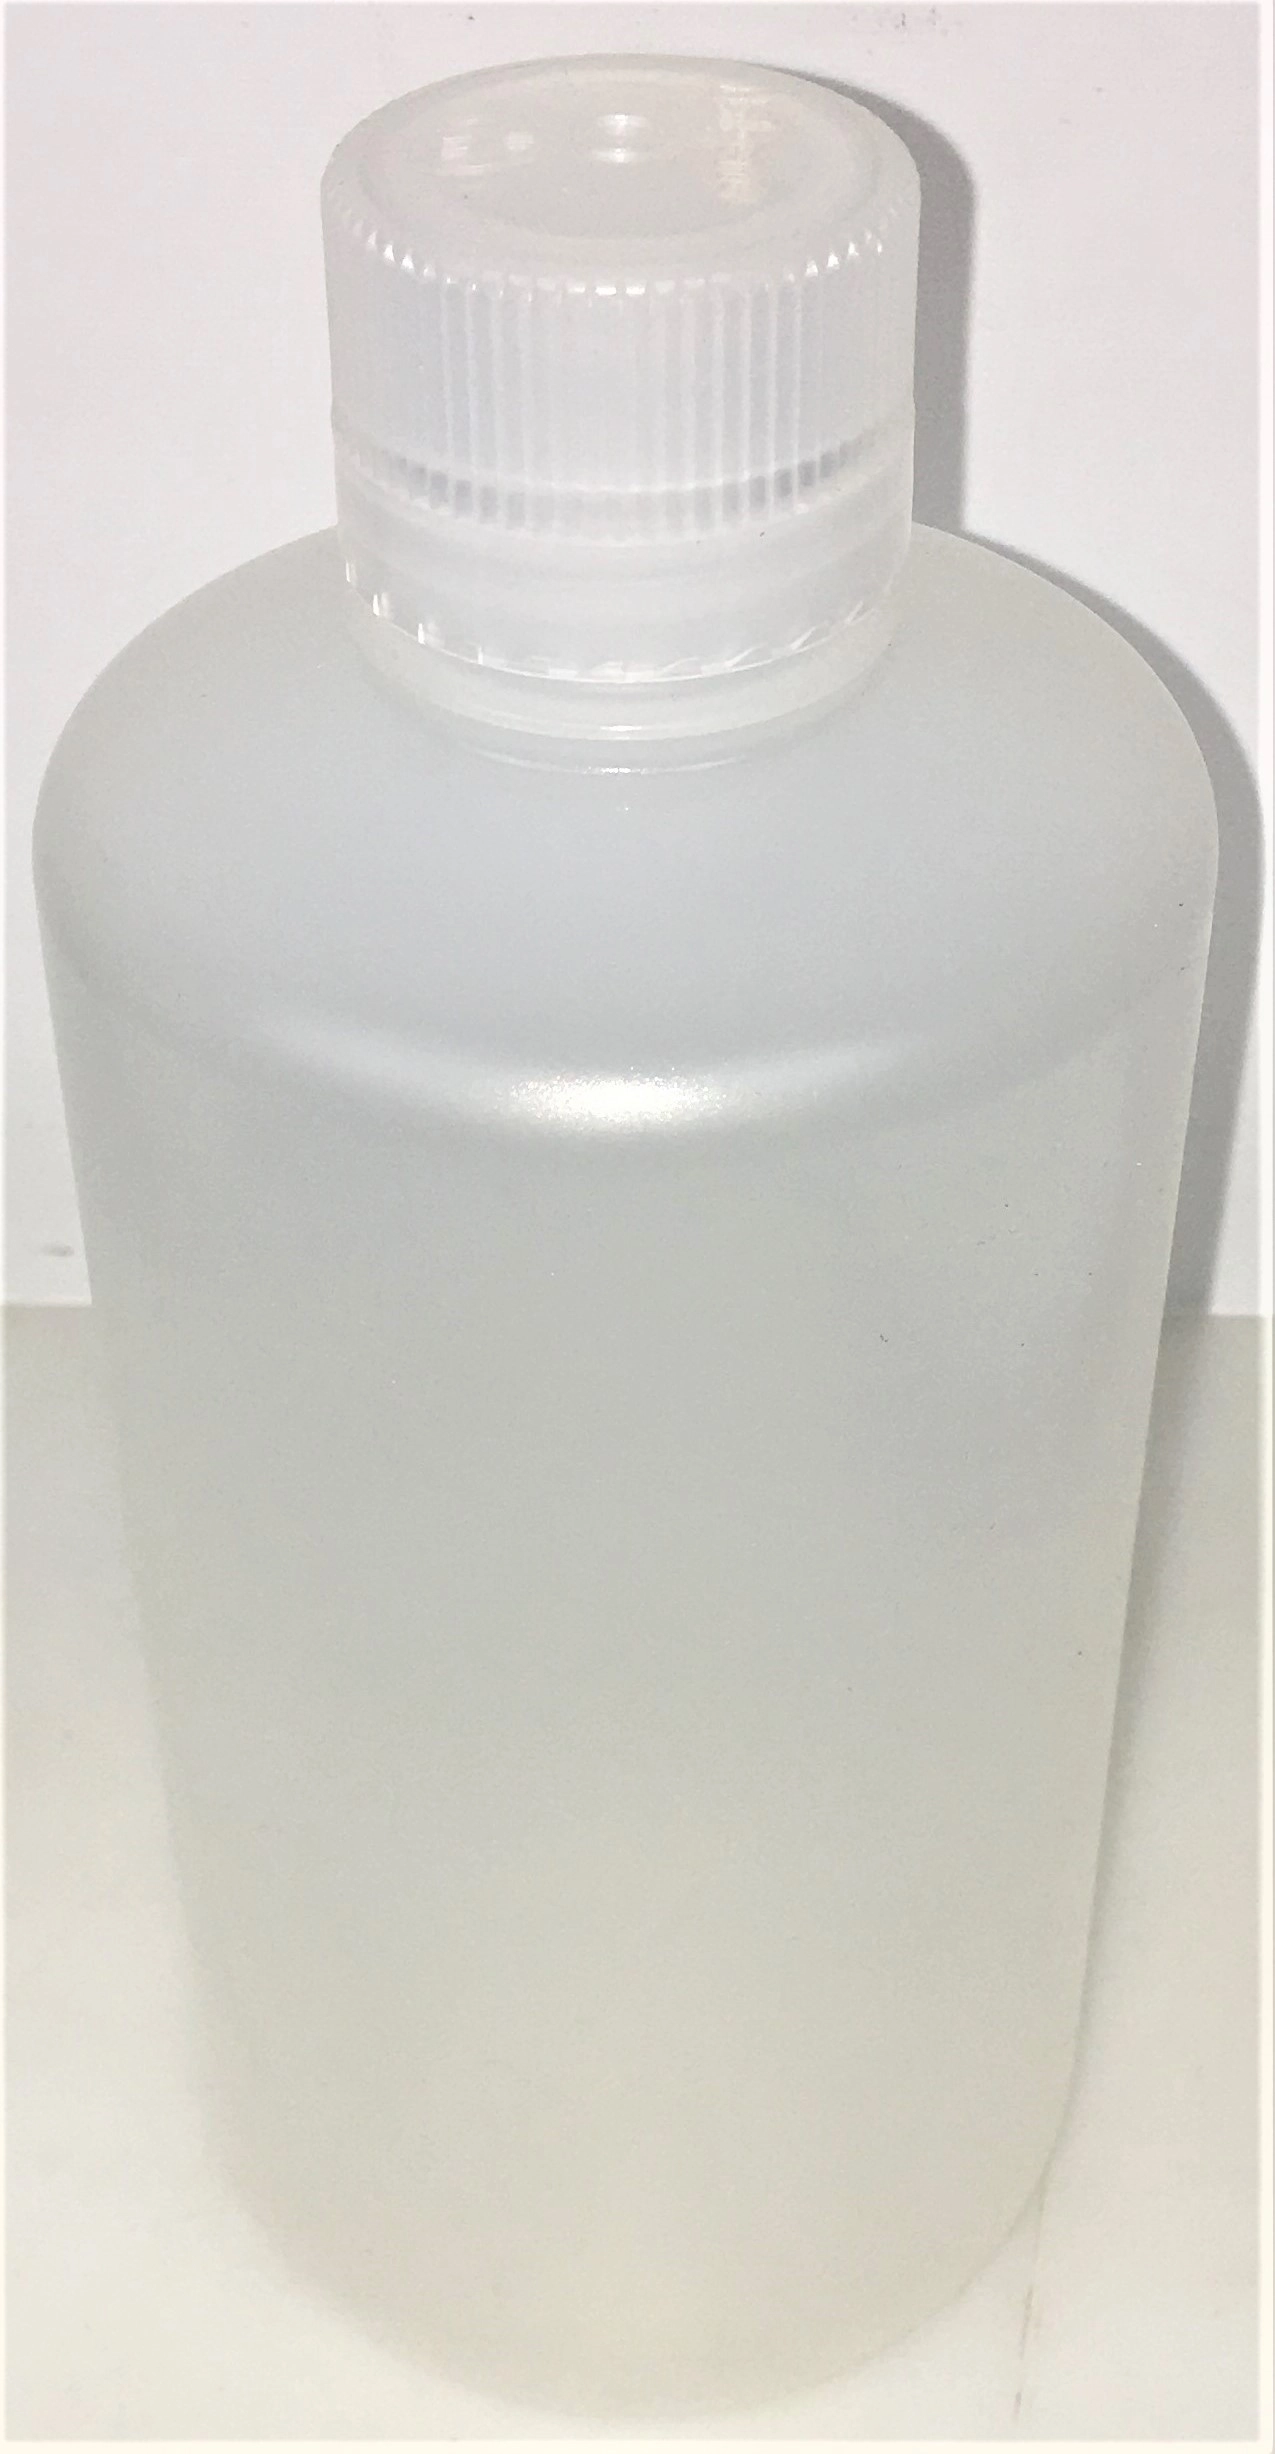 PYREX 160mL Wide Mouth Milk Dilution Bottle with Screw Cap, Pack of 6